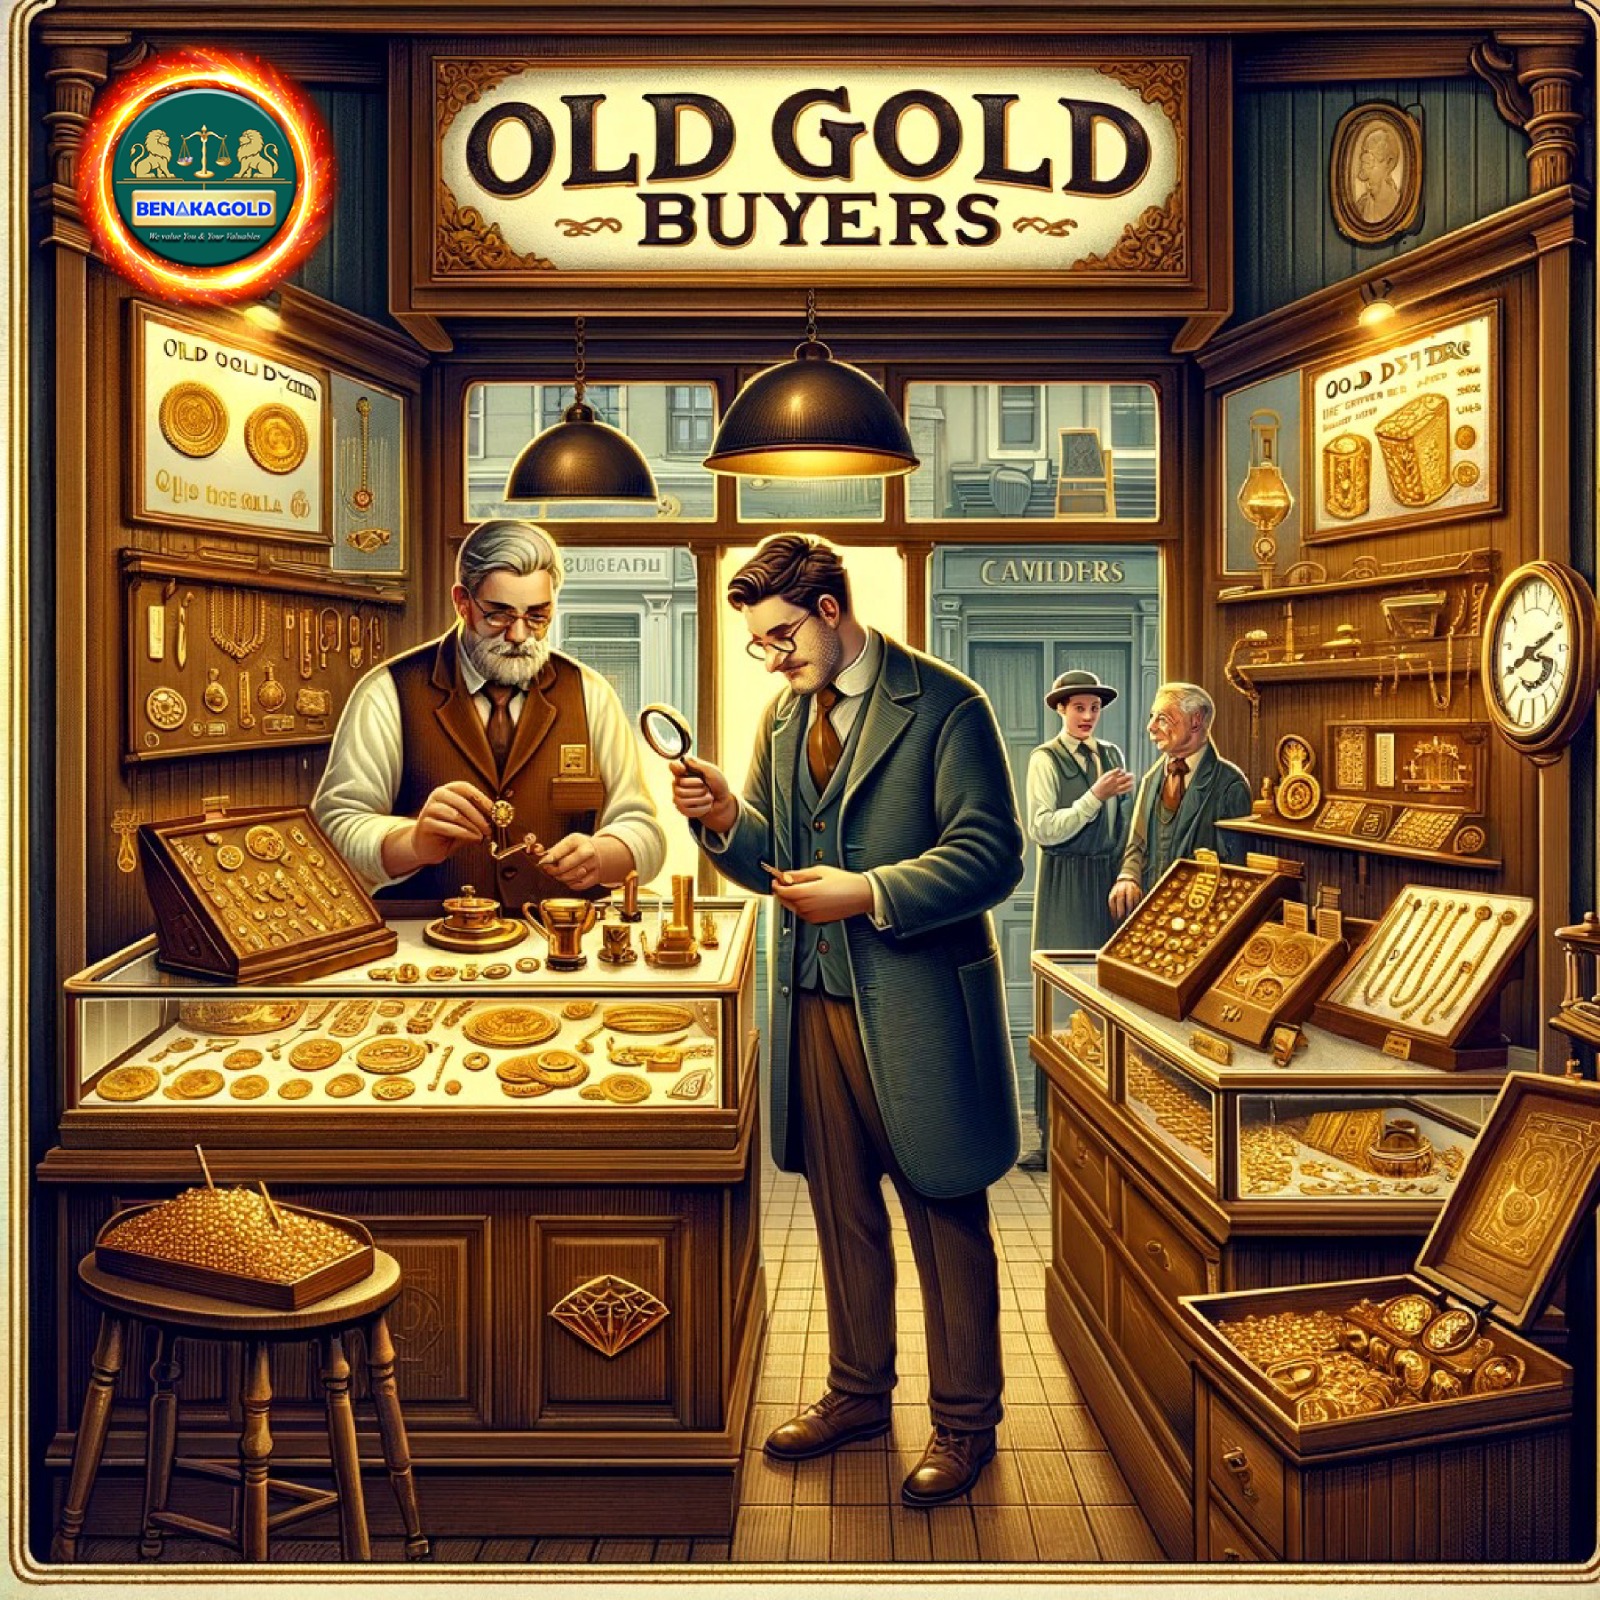 Old gold buyers